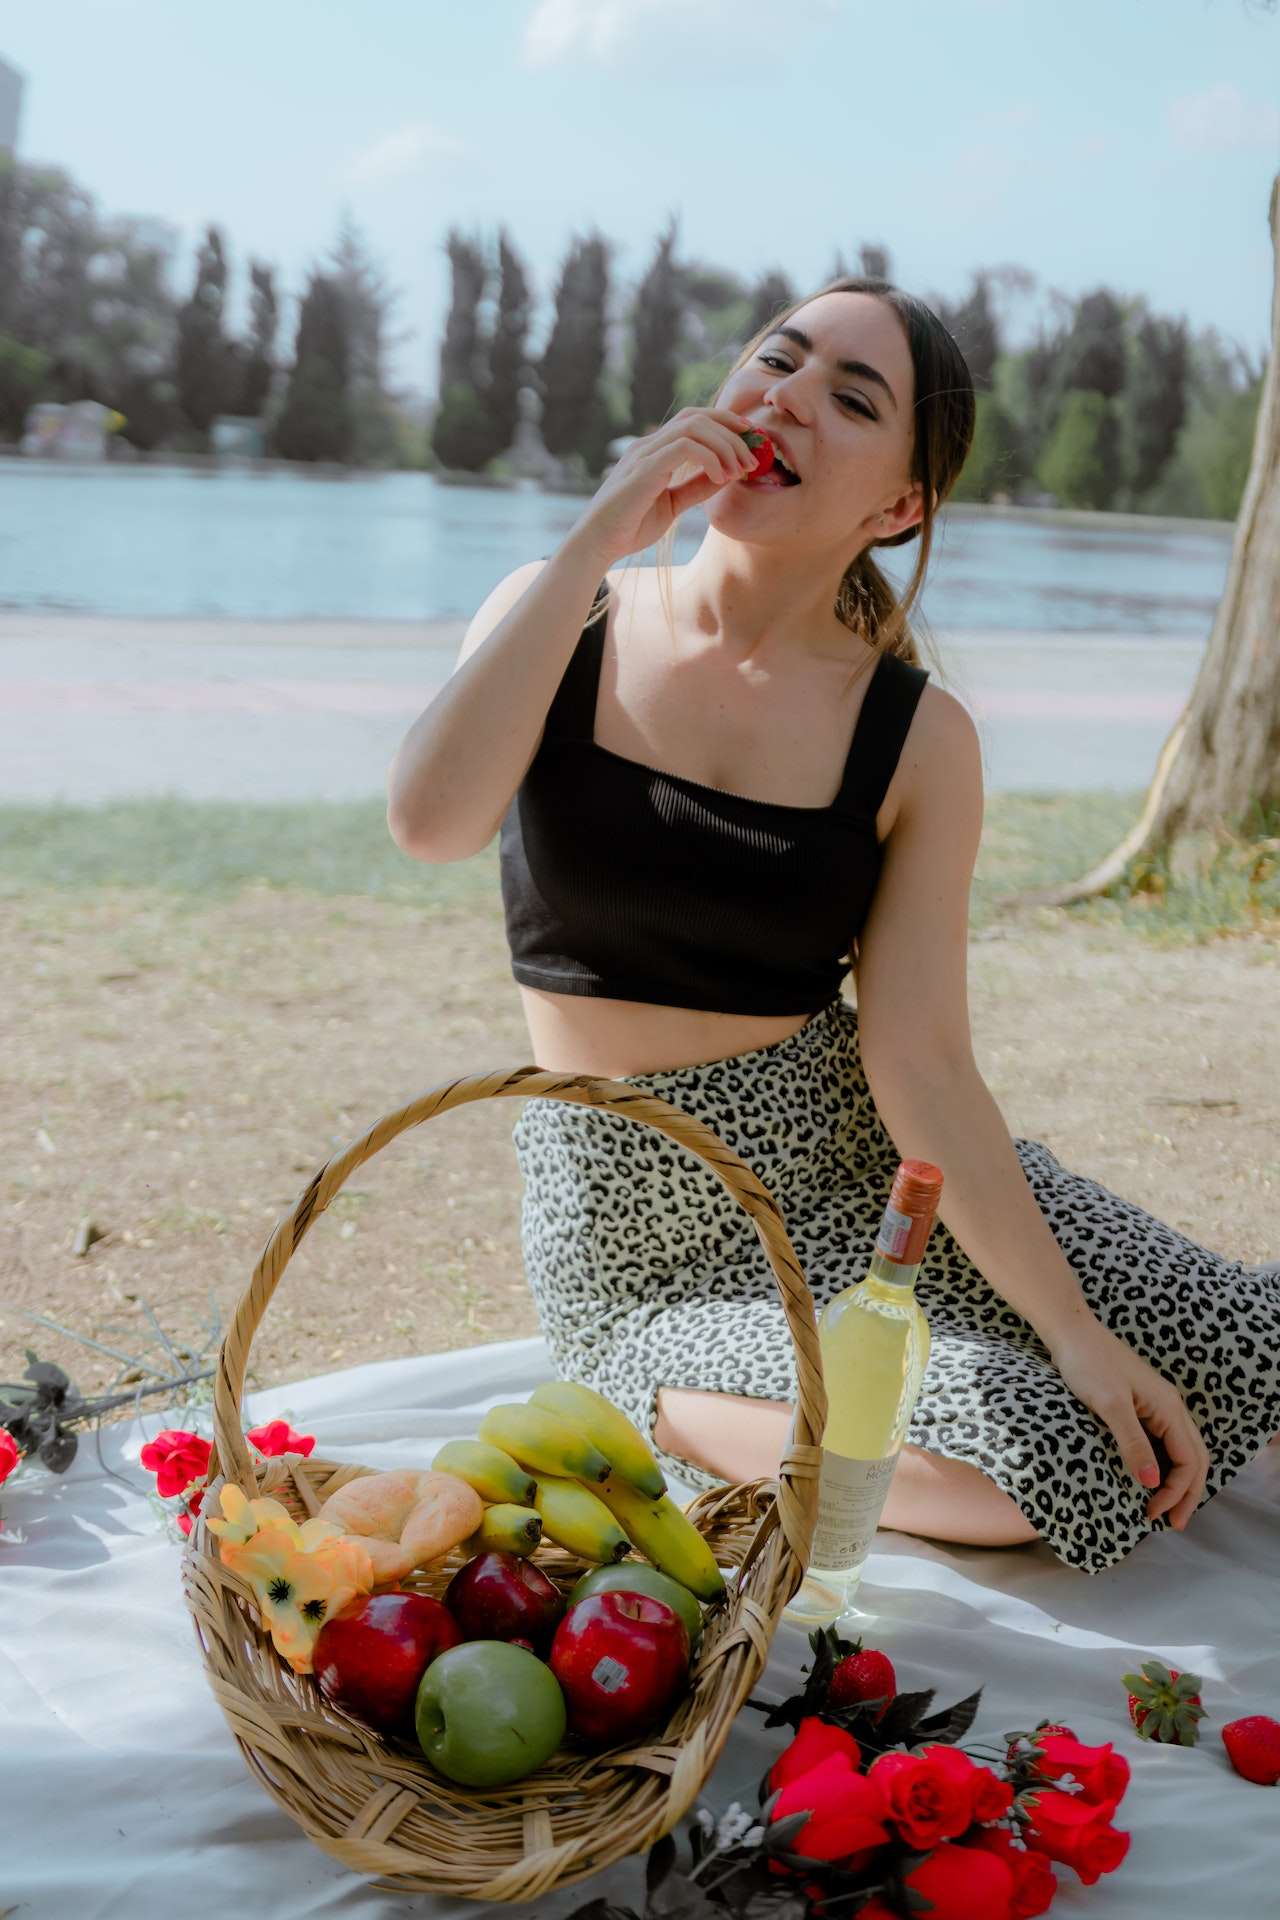 Woman in Black Top Eating Strawberry